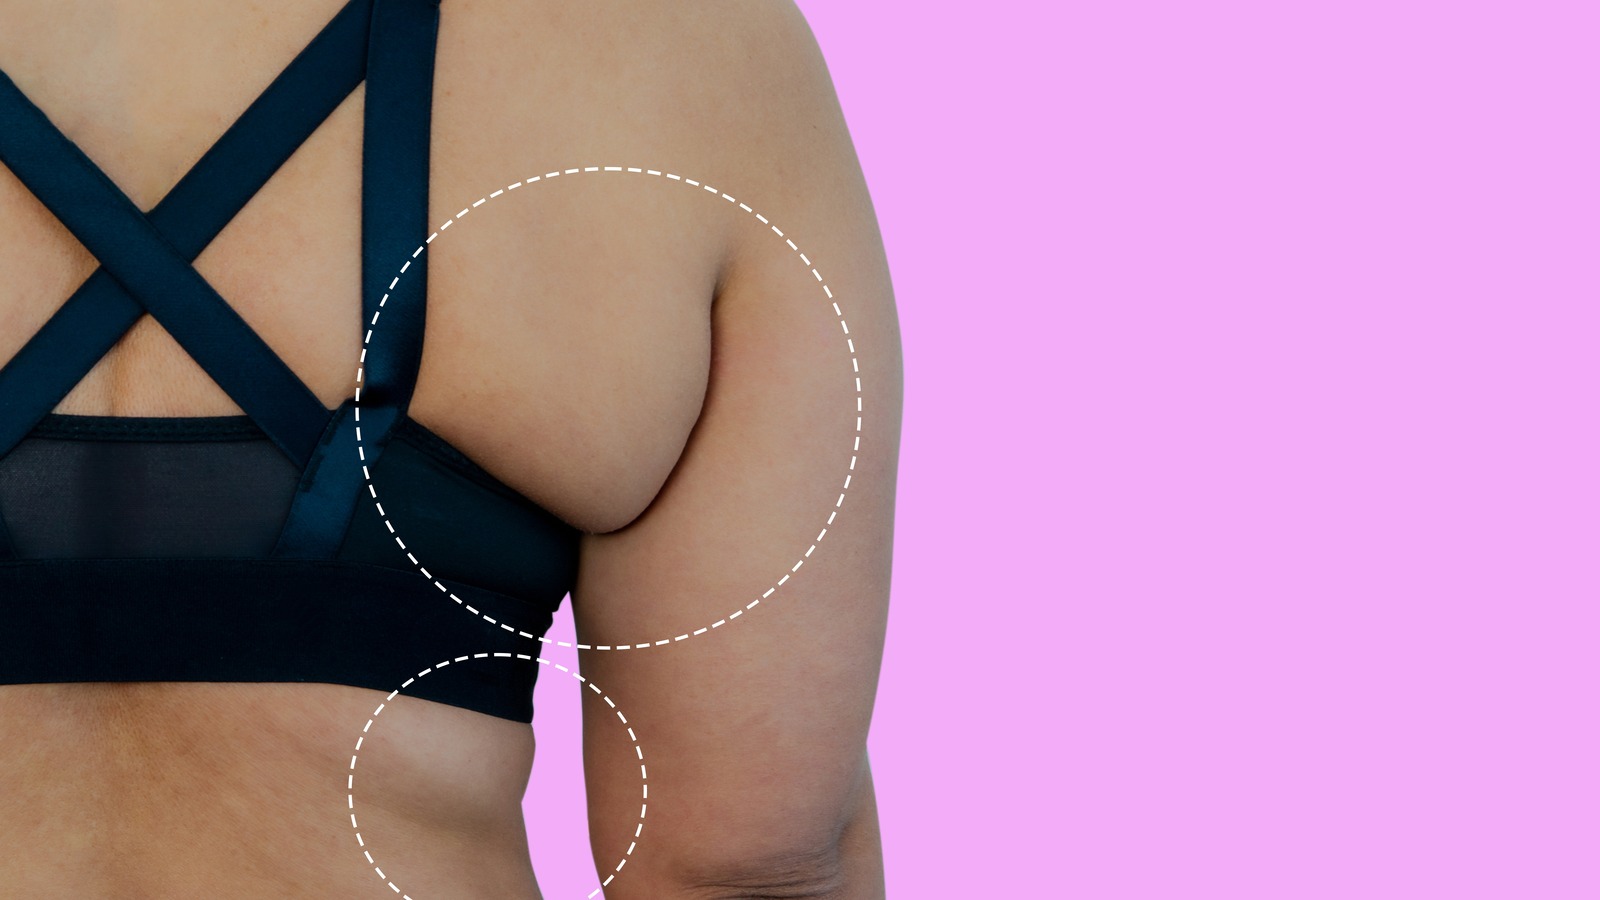 How Wearing The Wrong Size Bra Impacts You